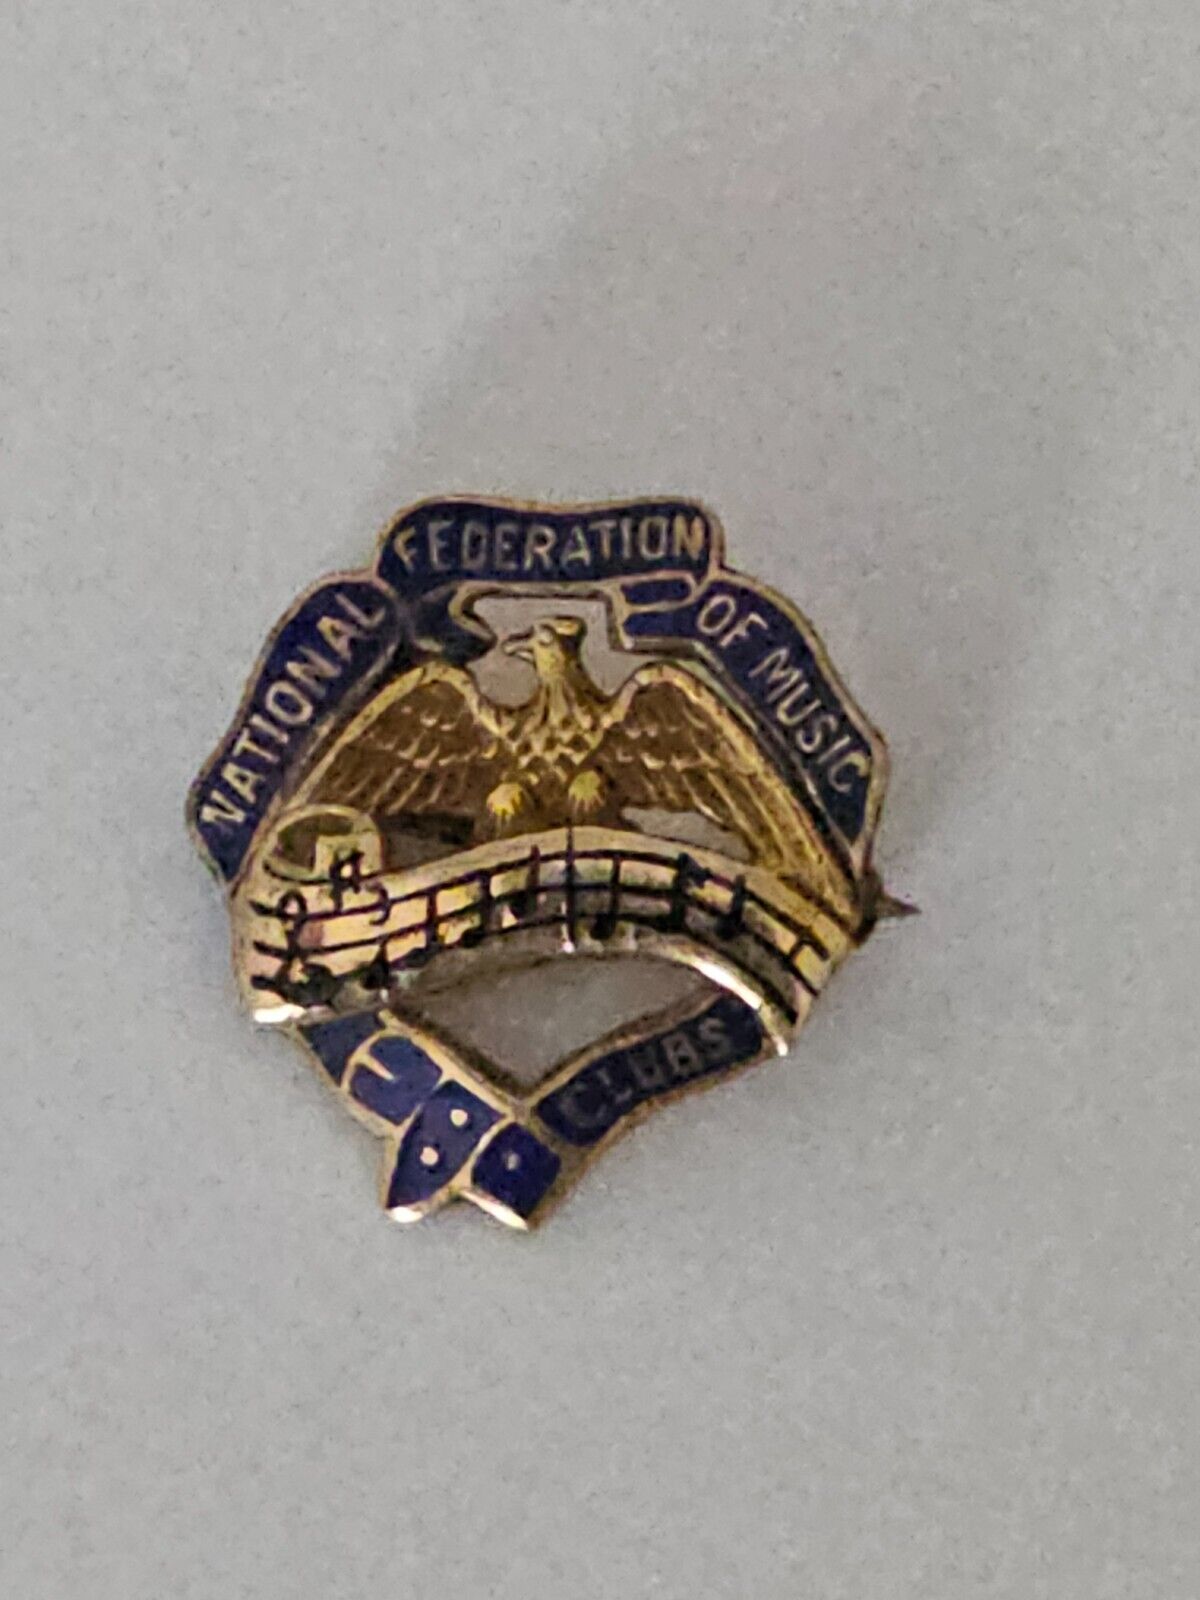 Vintage National Federation of Music Clubs Lapel Pin Blue & Gold With Eagle